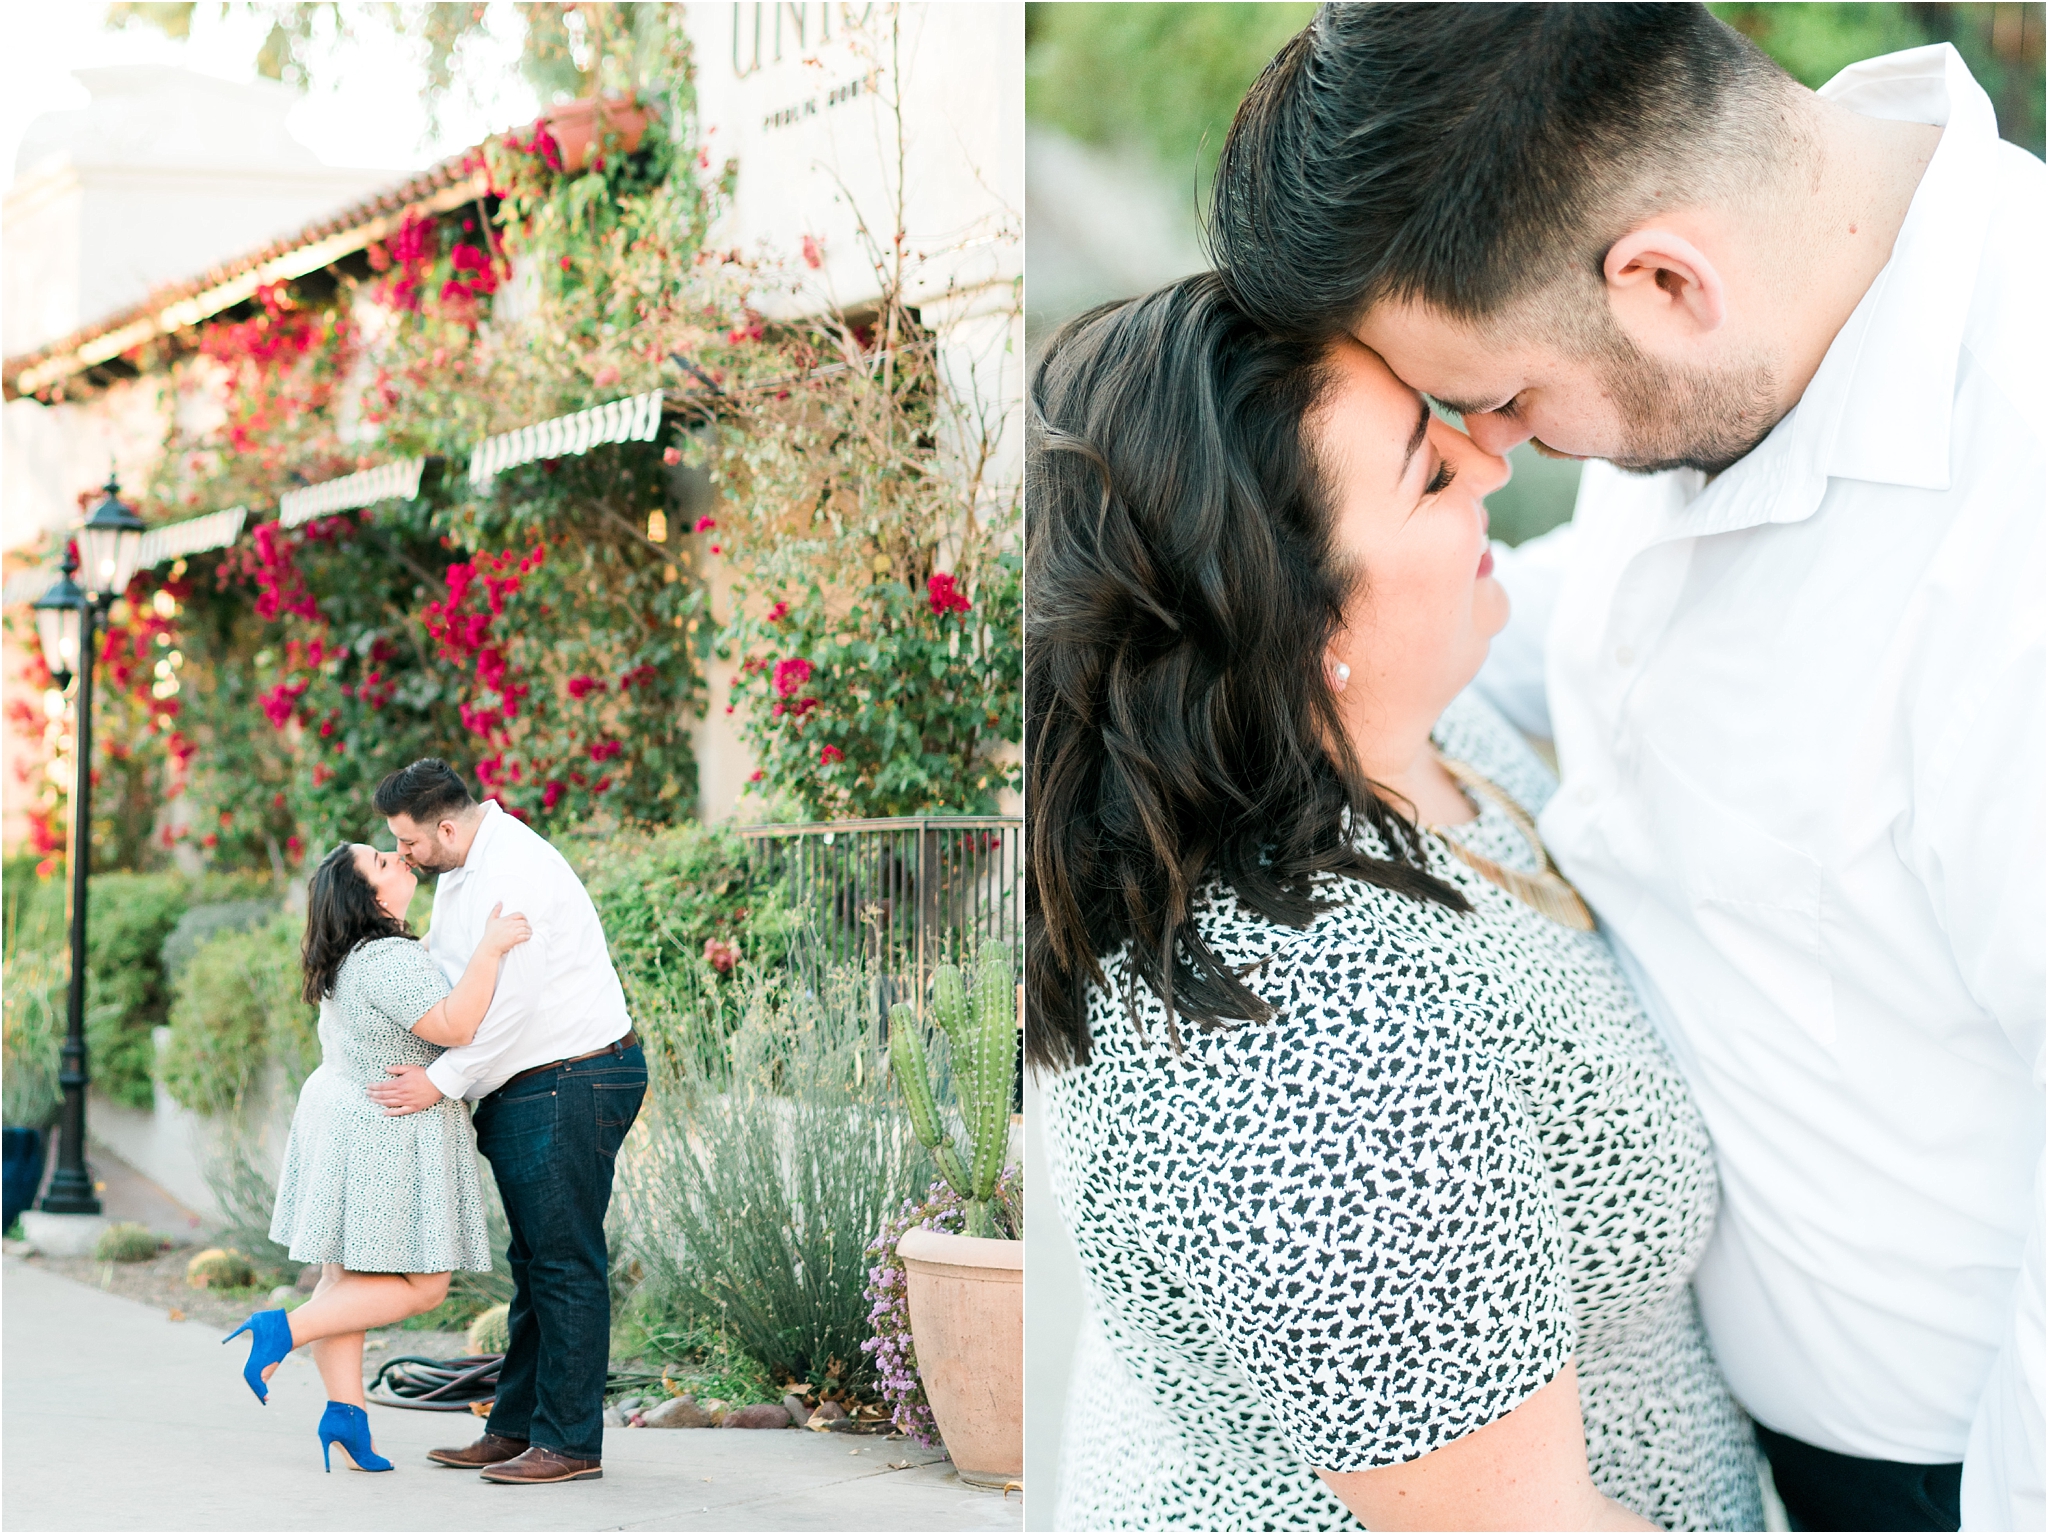 St Philip's Plaza engagement photos by Tucson Wedding Photographer | West End Photography